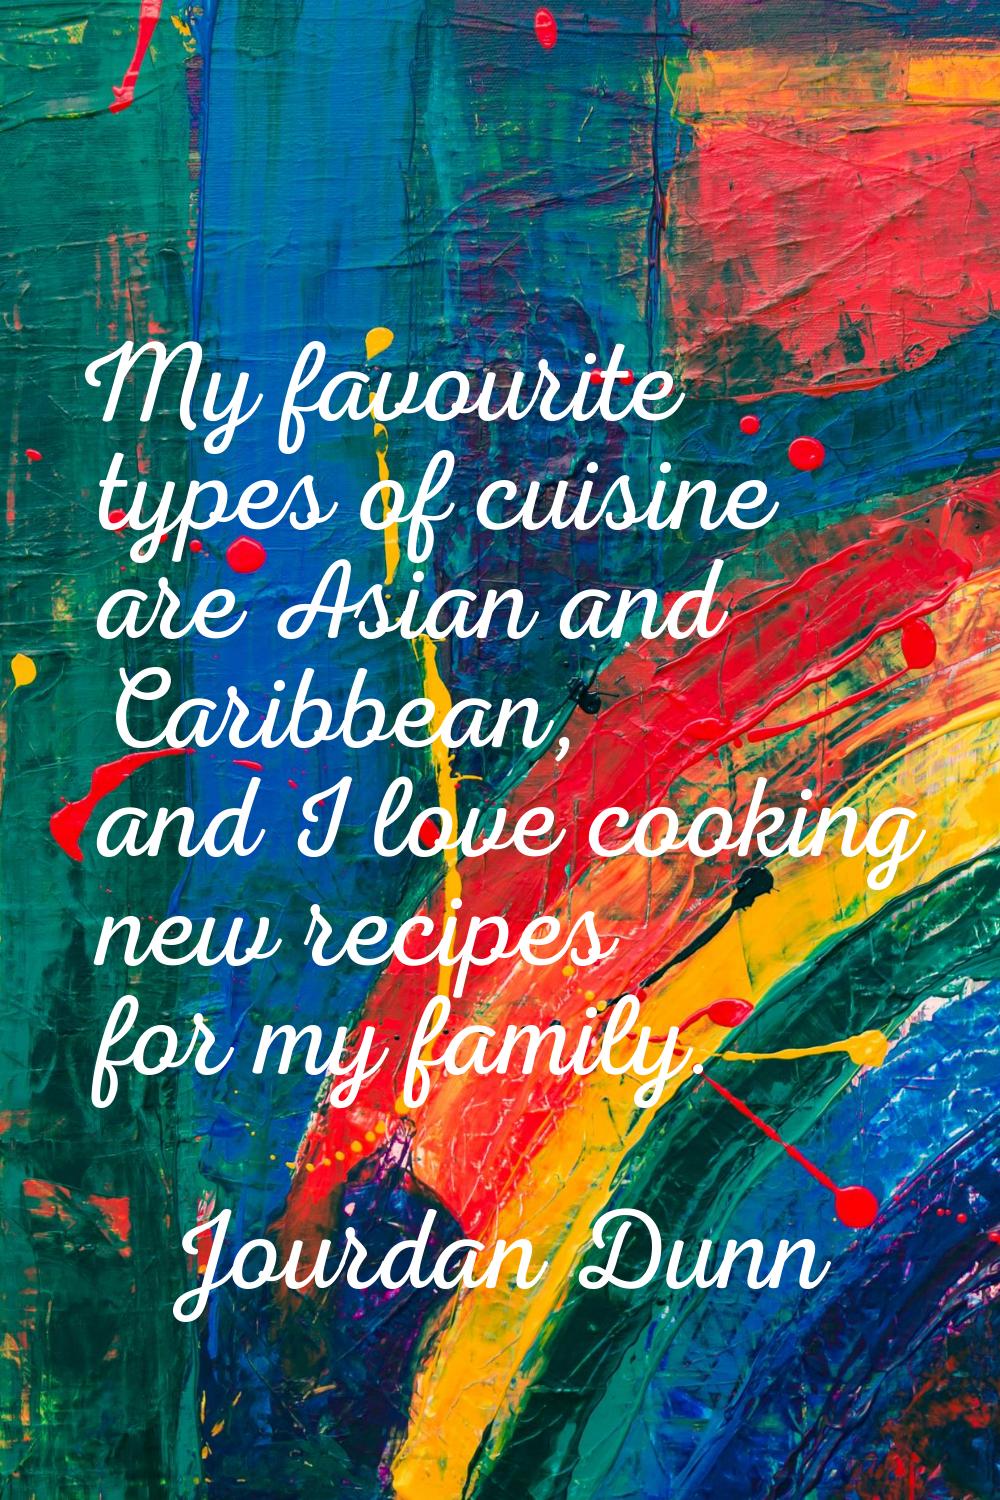 My favourite types of cuisine are Asian and Caribbean, and I love cooking new recipes for my family